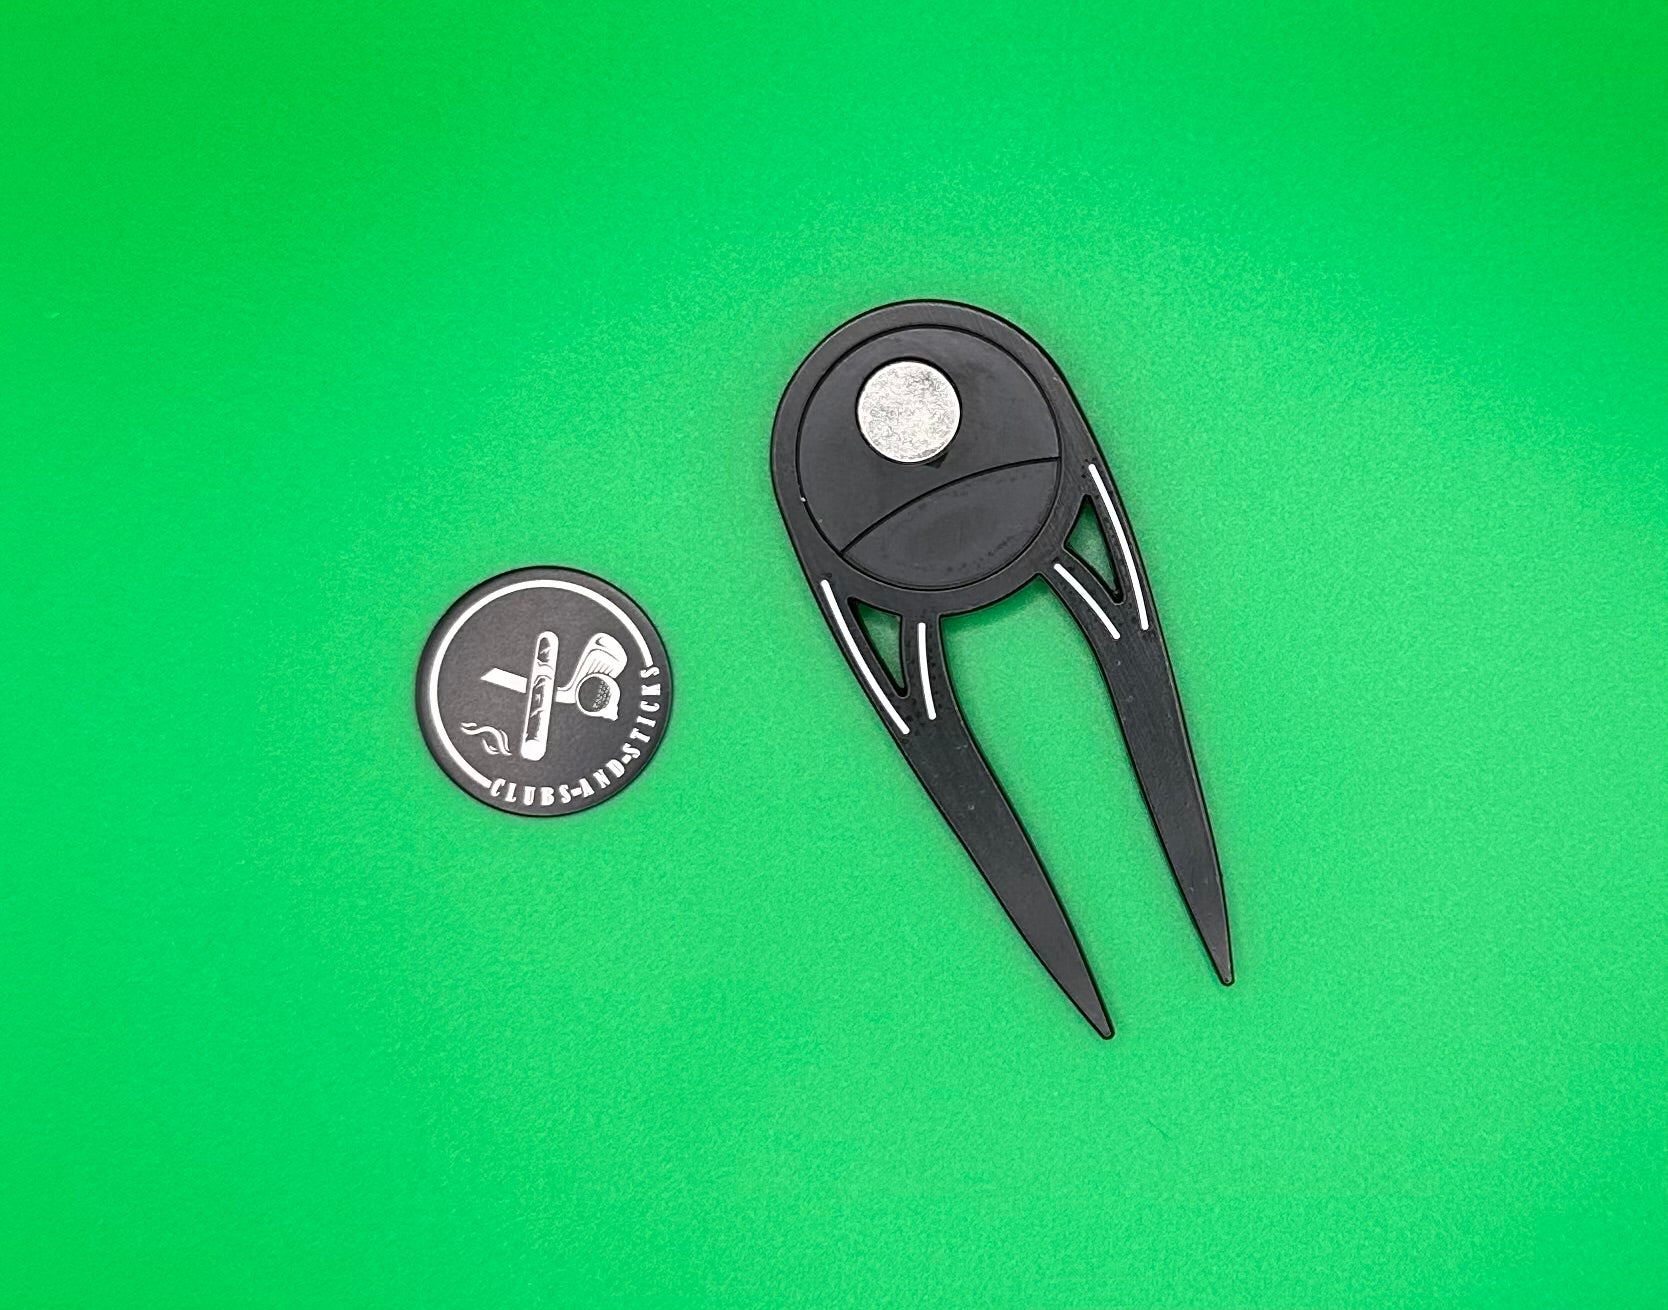 Clubs and Sticks Two Prong Divot Tool